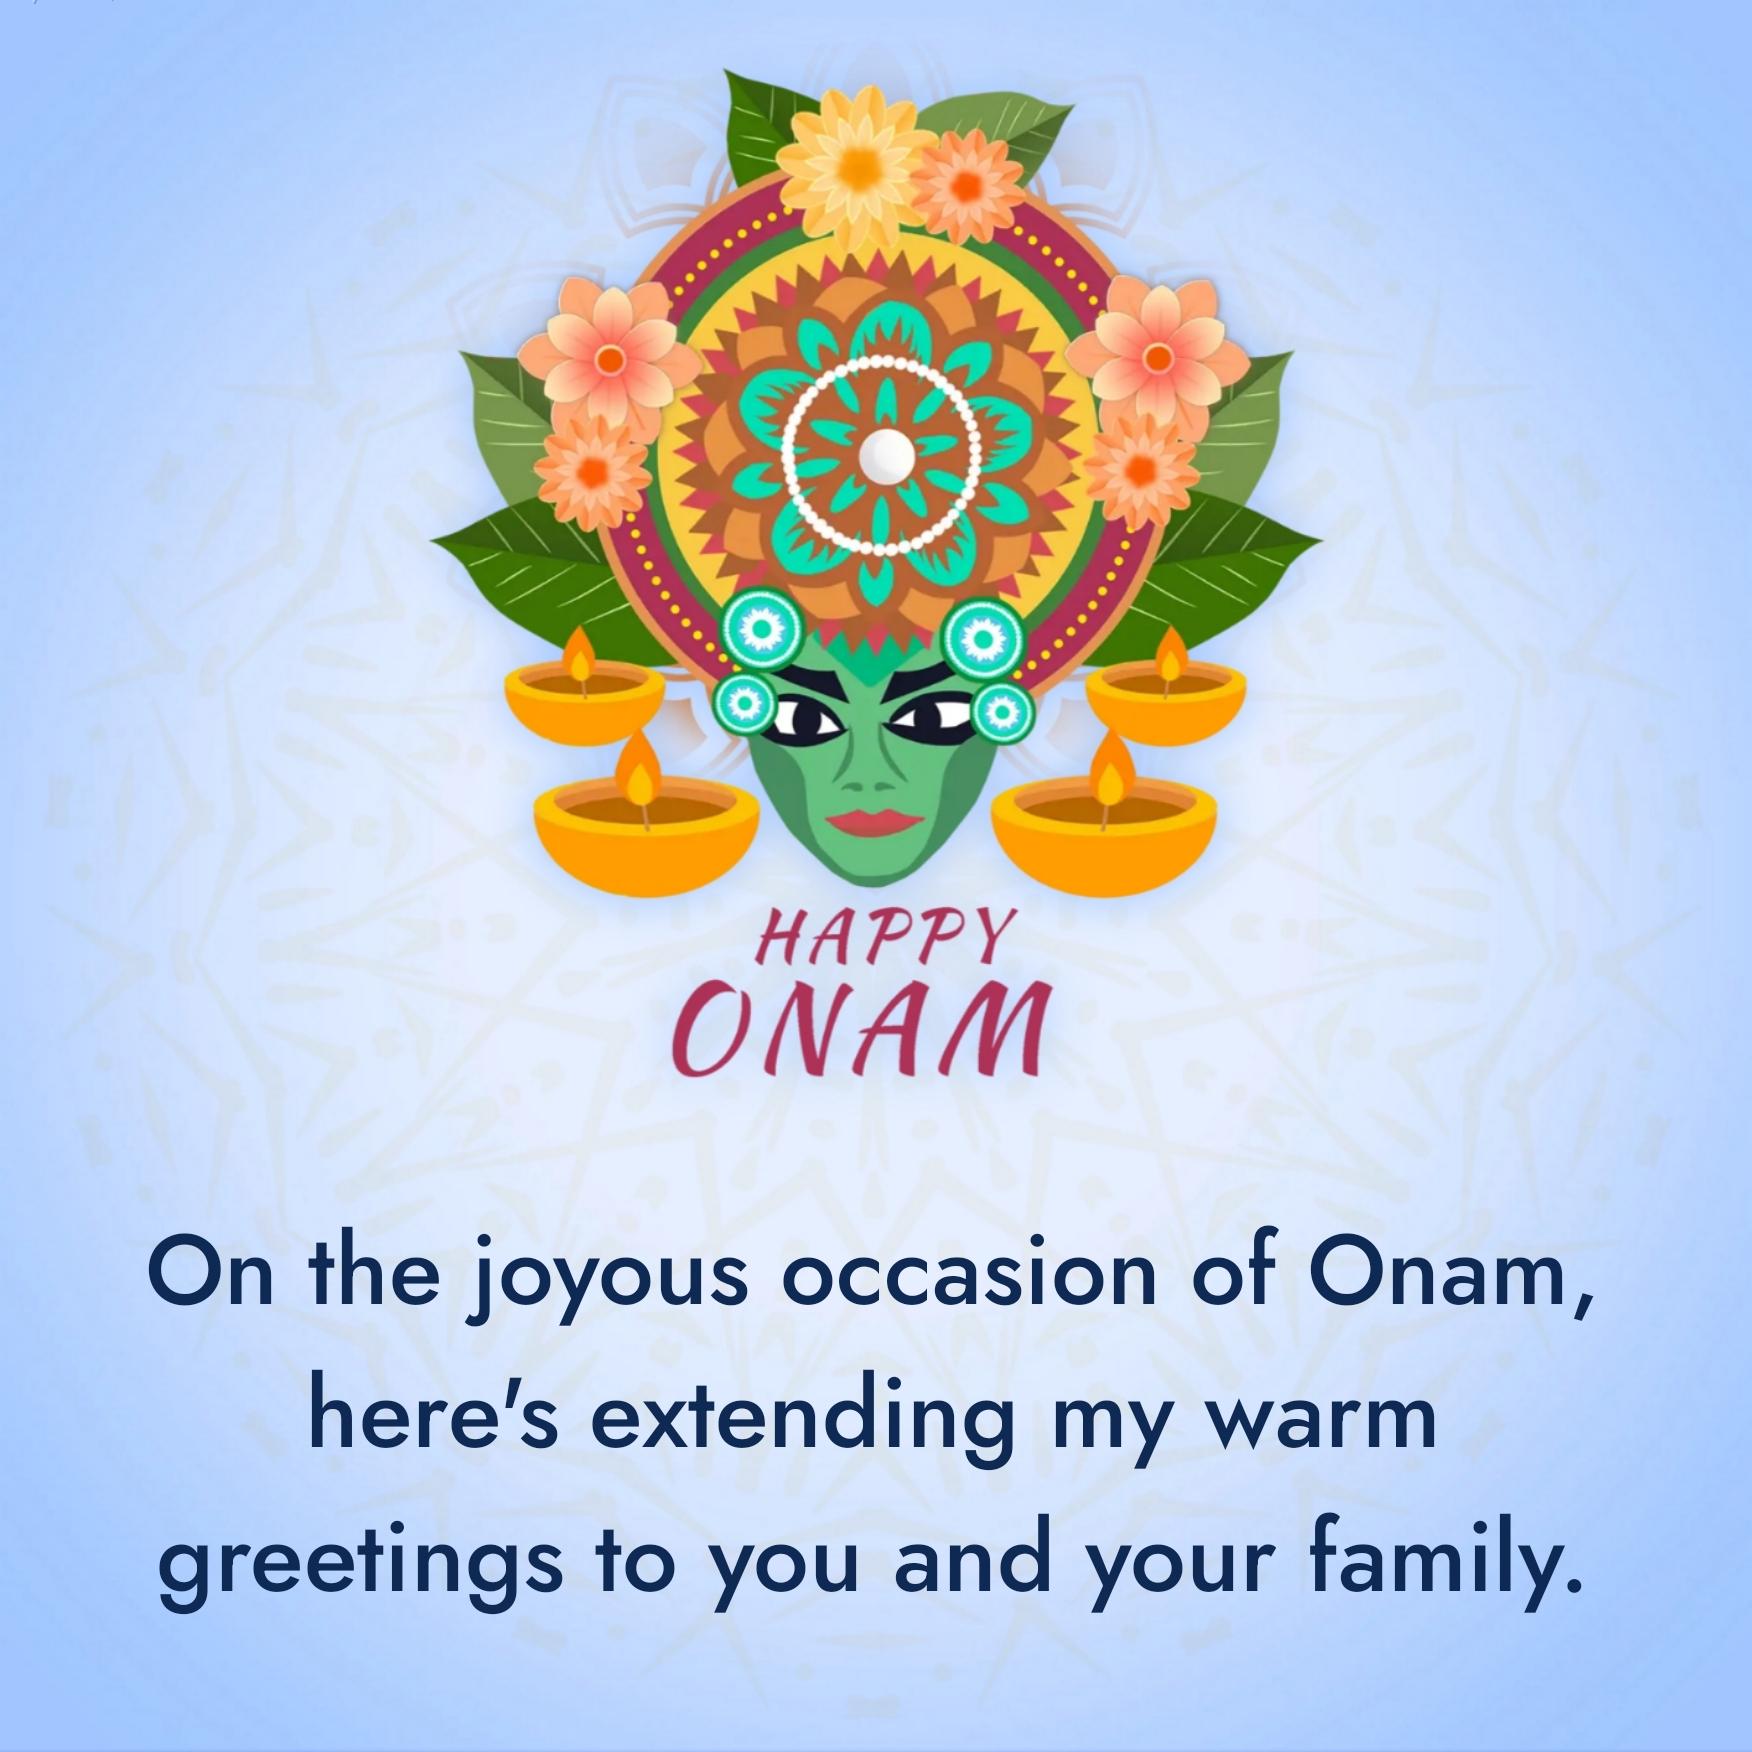 On the joyous occasion of Onam here's extending my warm greetings